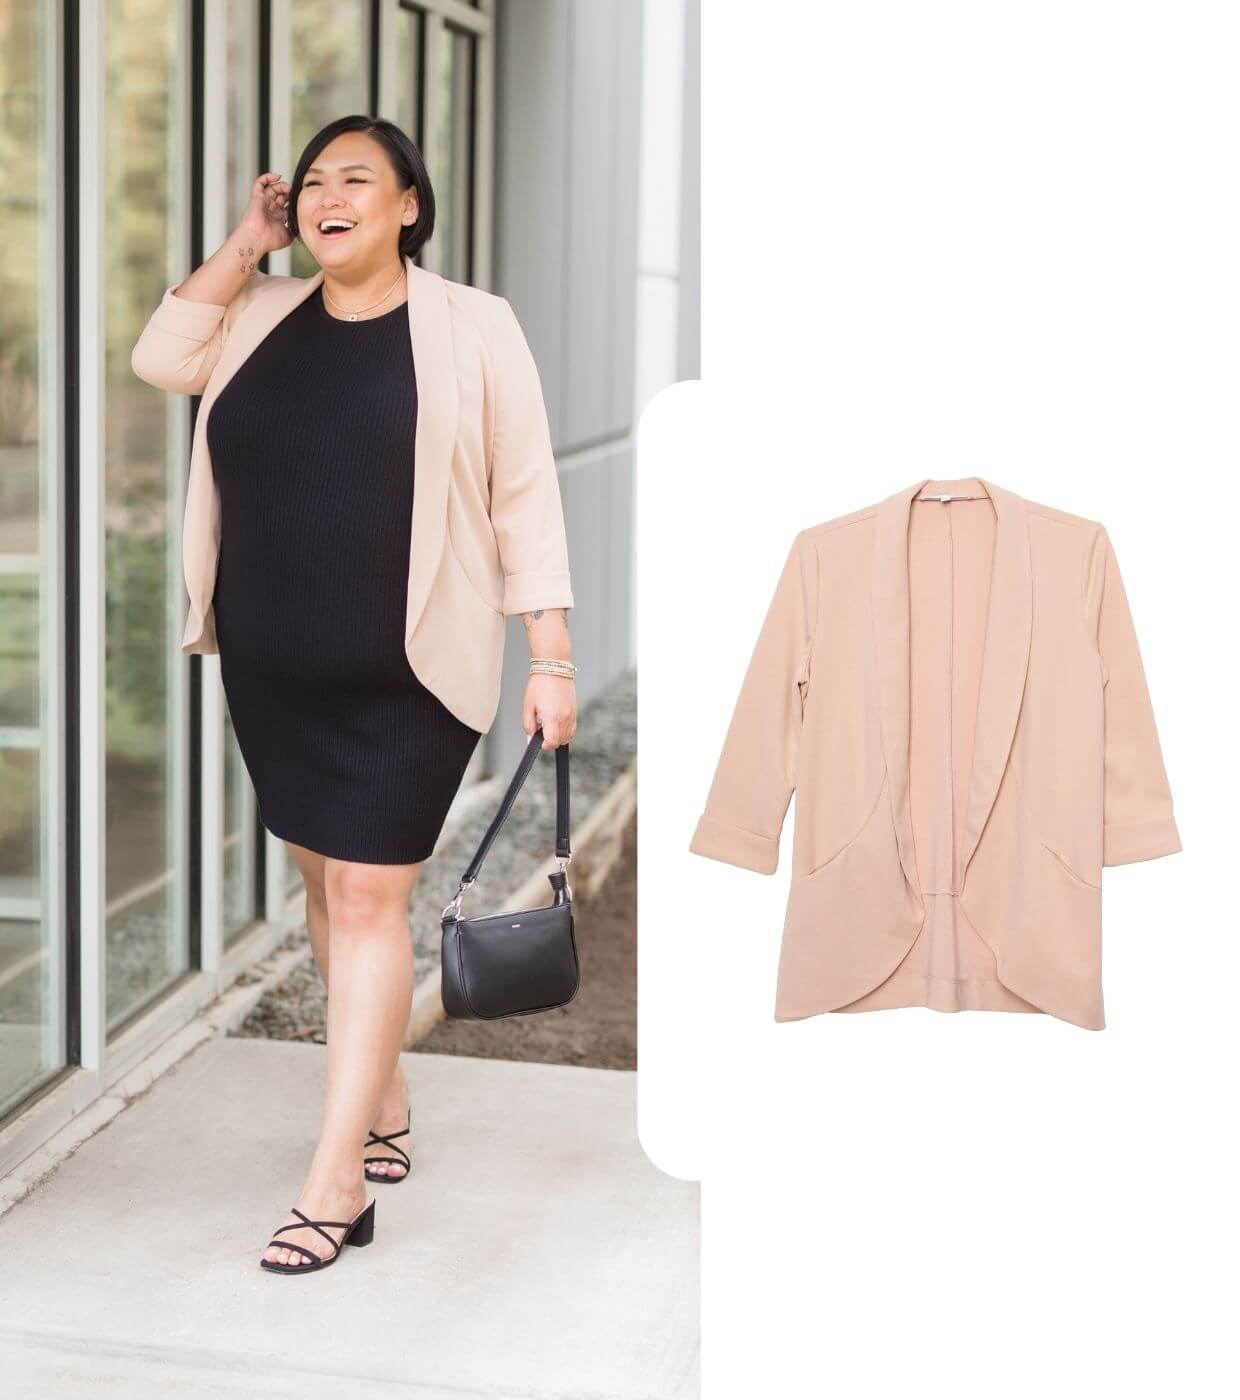 Silver Icing Product Feature Spotlight: The Versatility of a Blazer